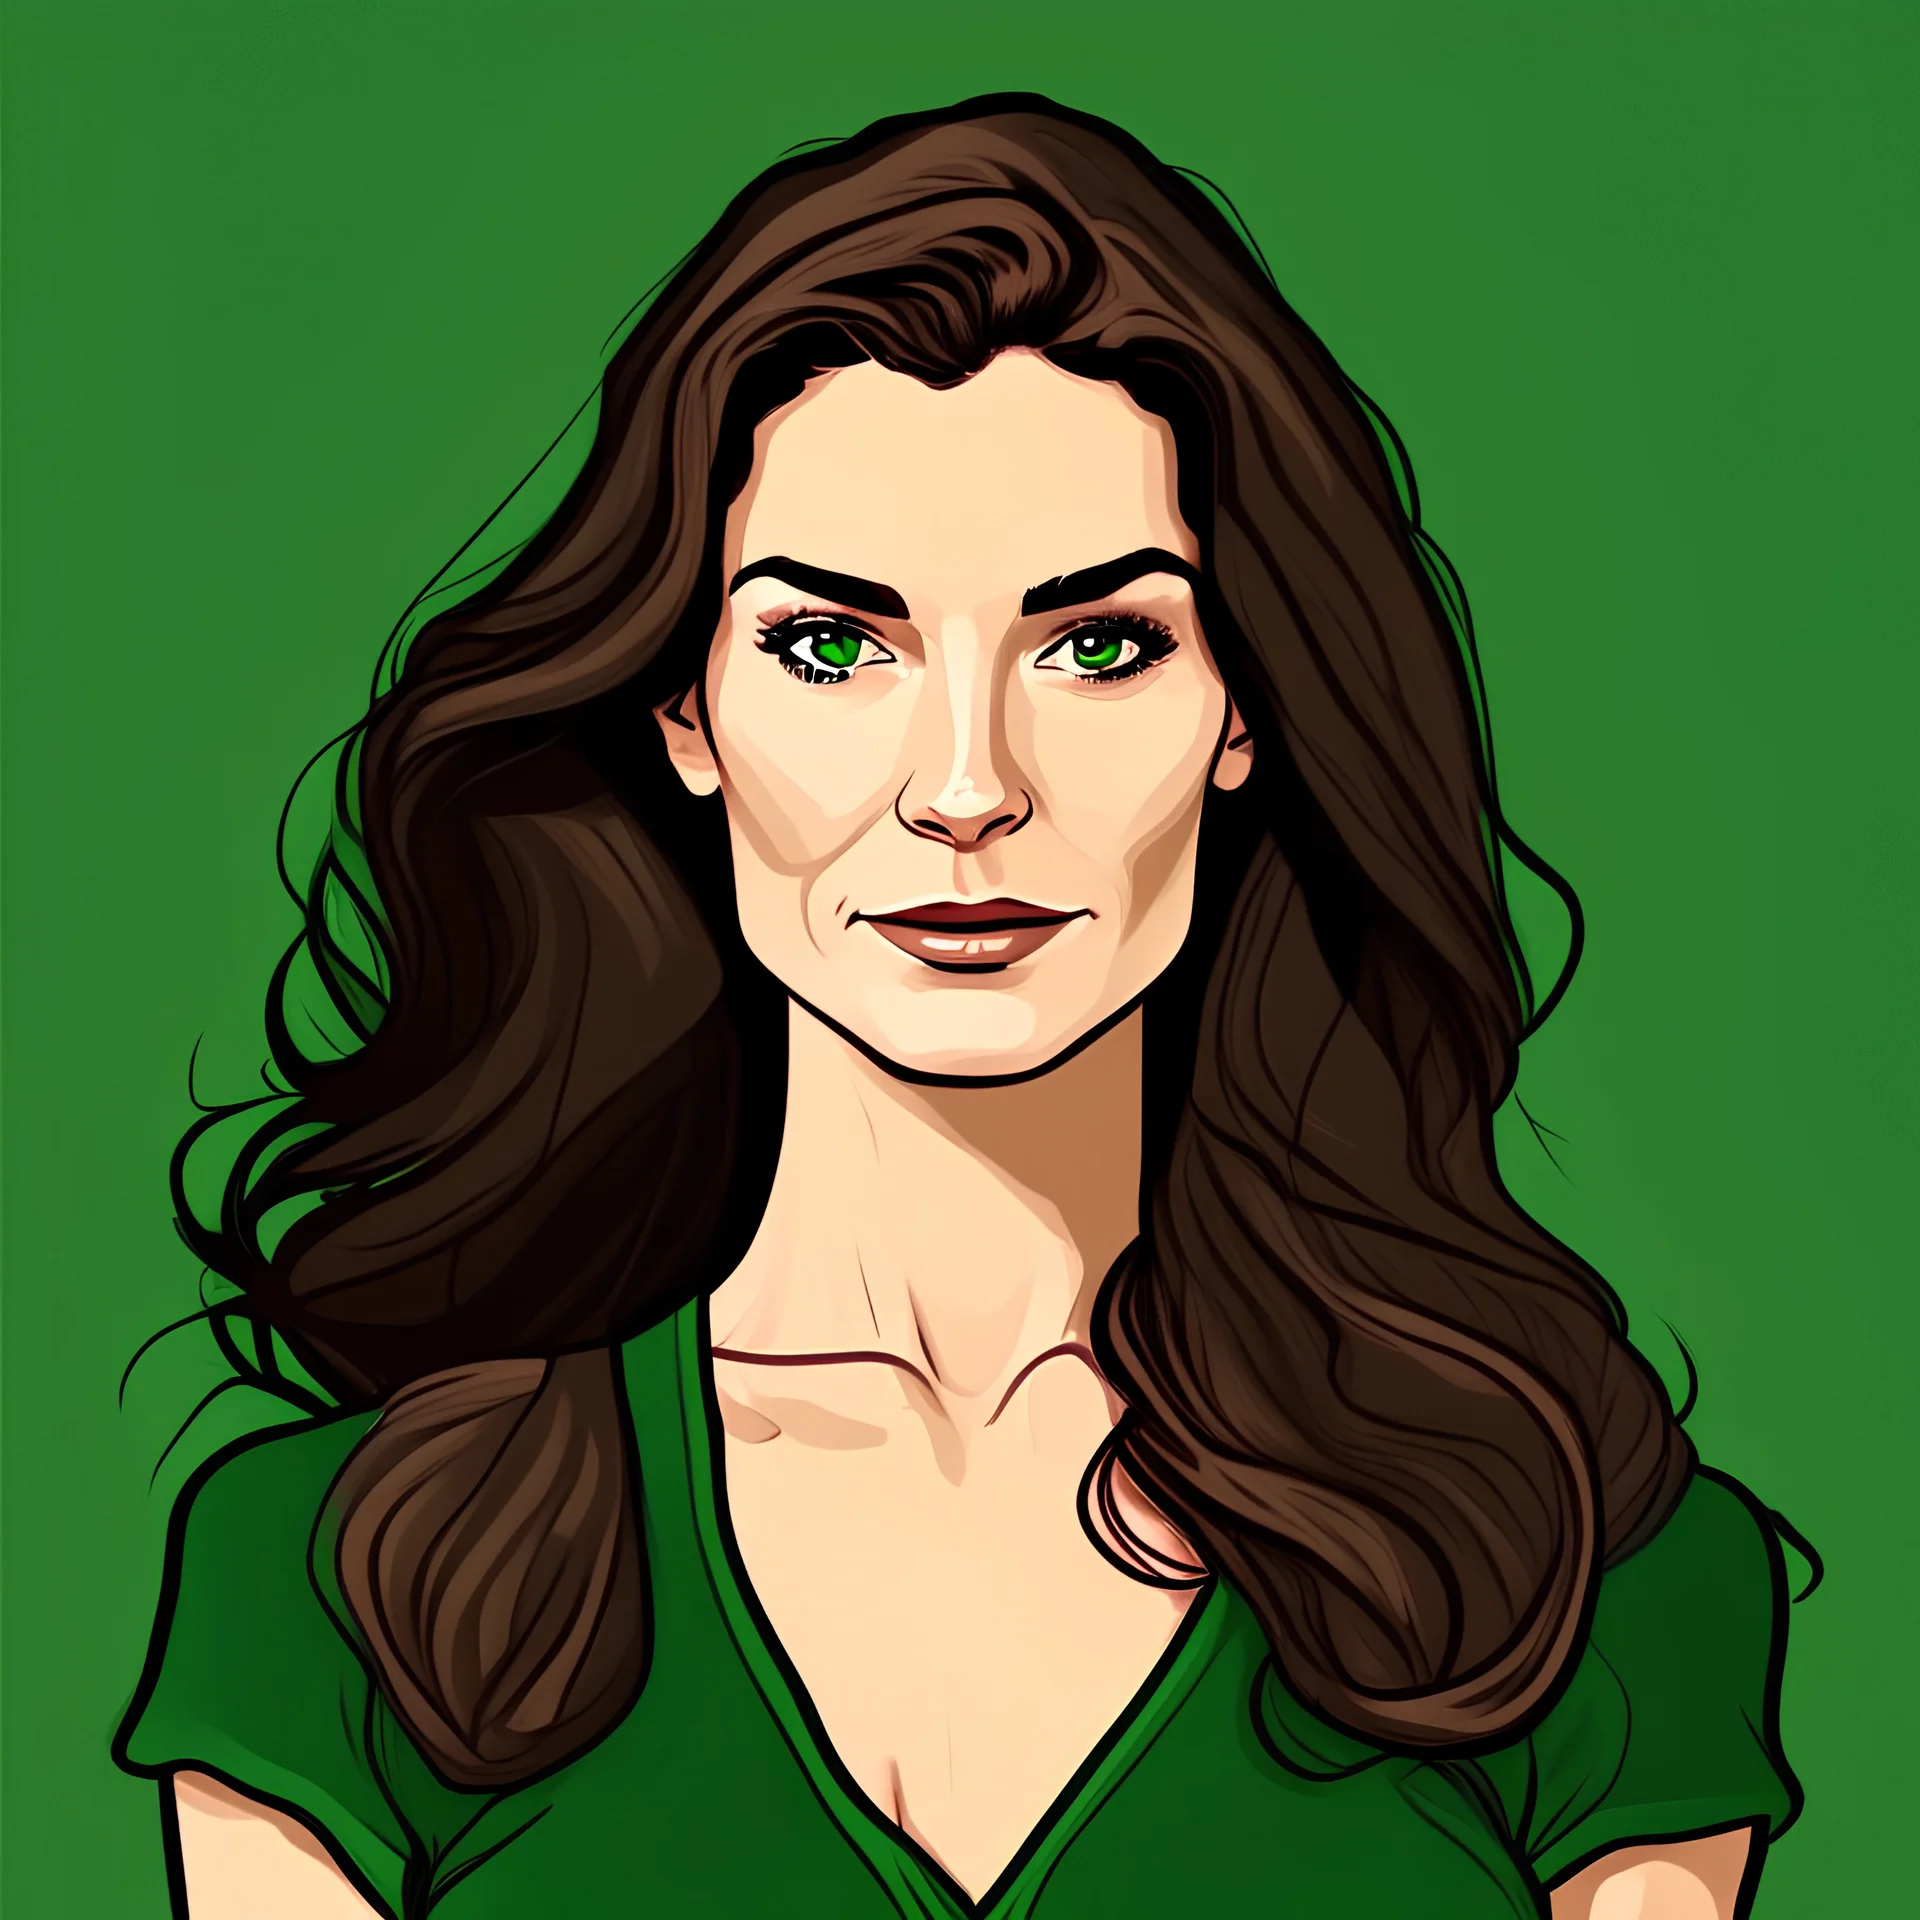 2d Illustration of a 27 year old beautiful American woman, front view, flat single dark green background